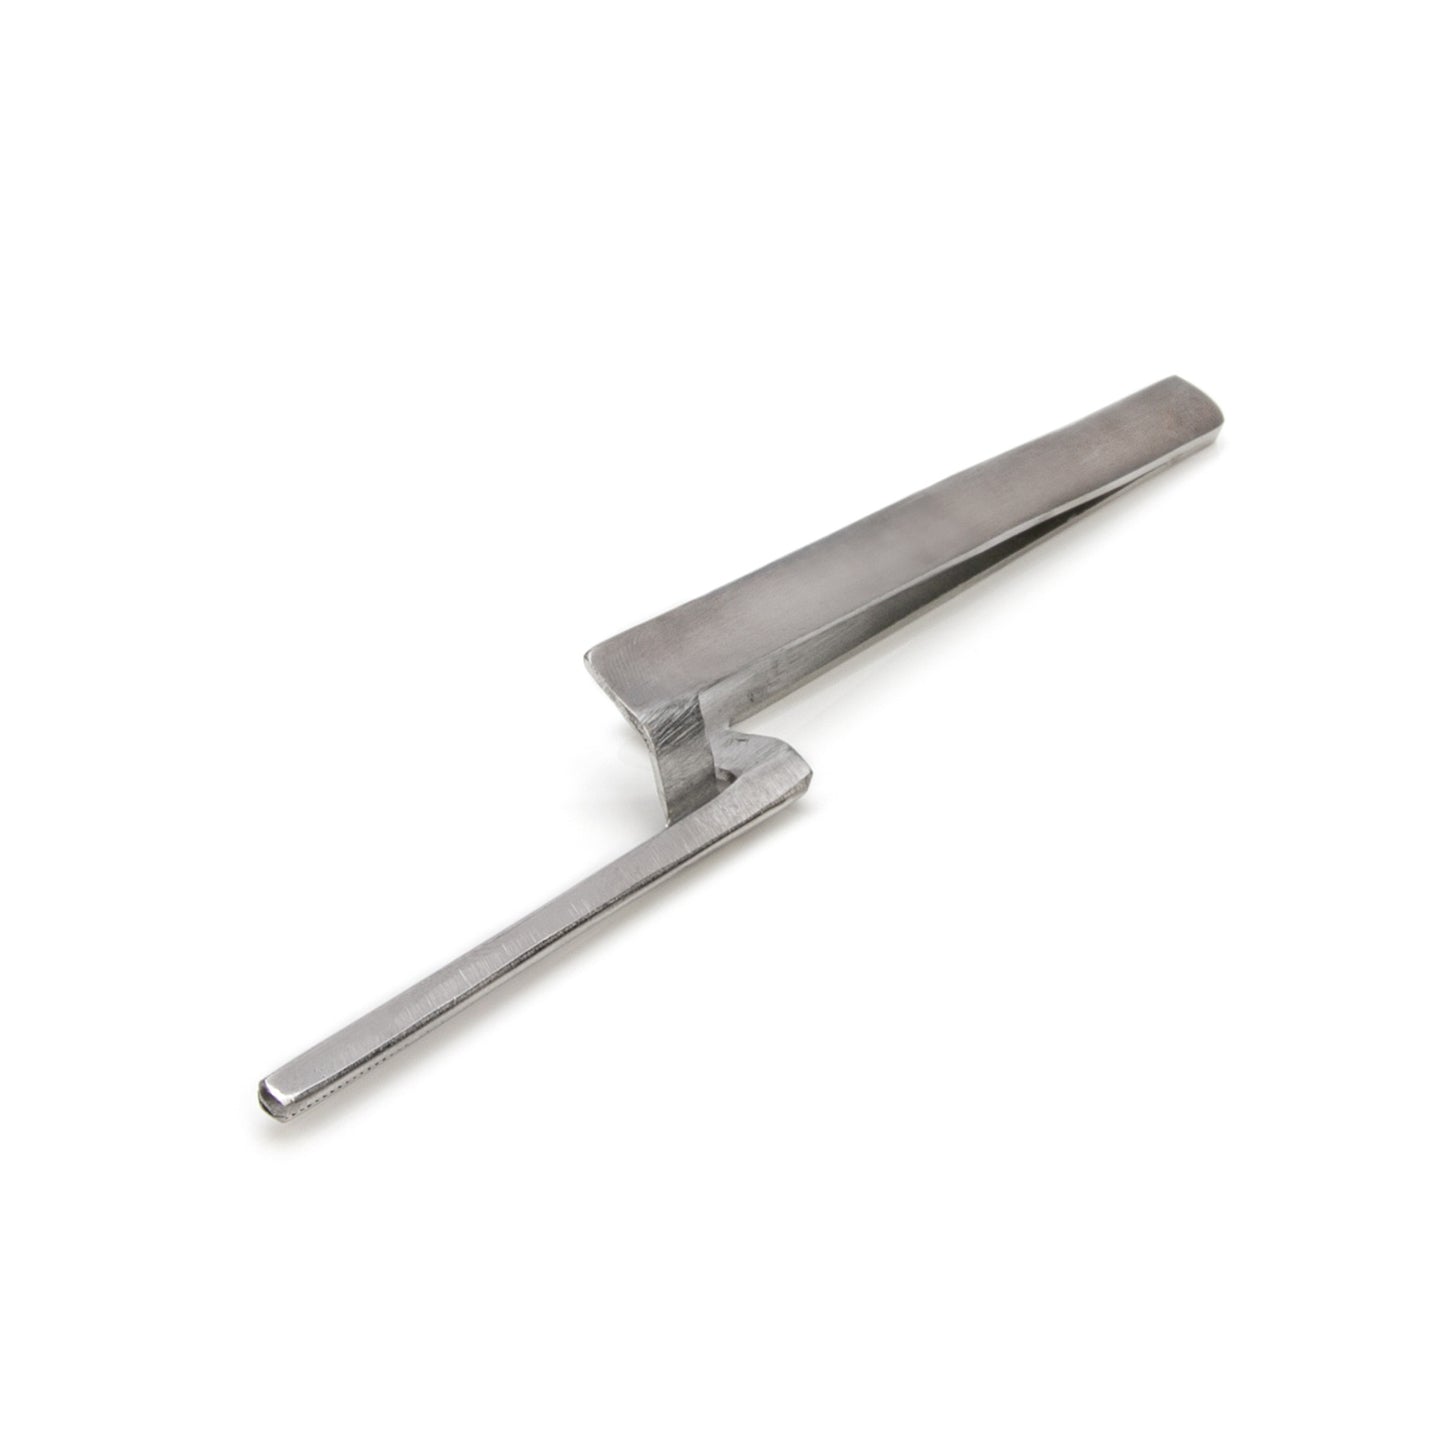 6-inch Rounded Tip Offset Self-Closing Utility Tweezers